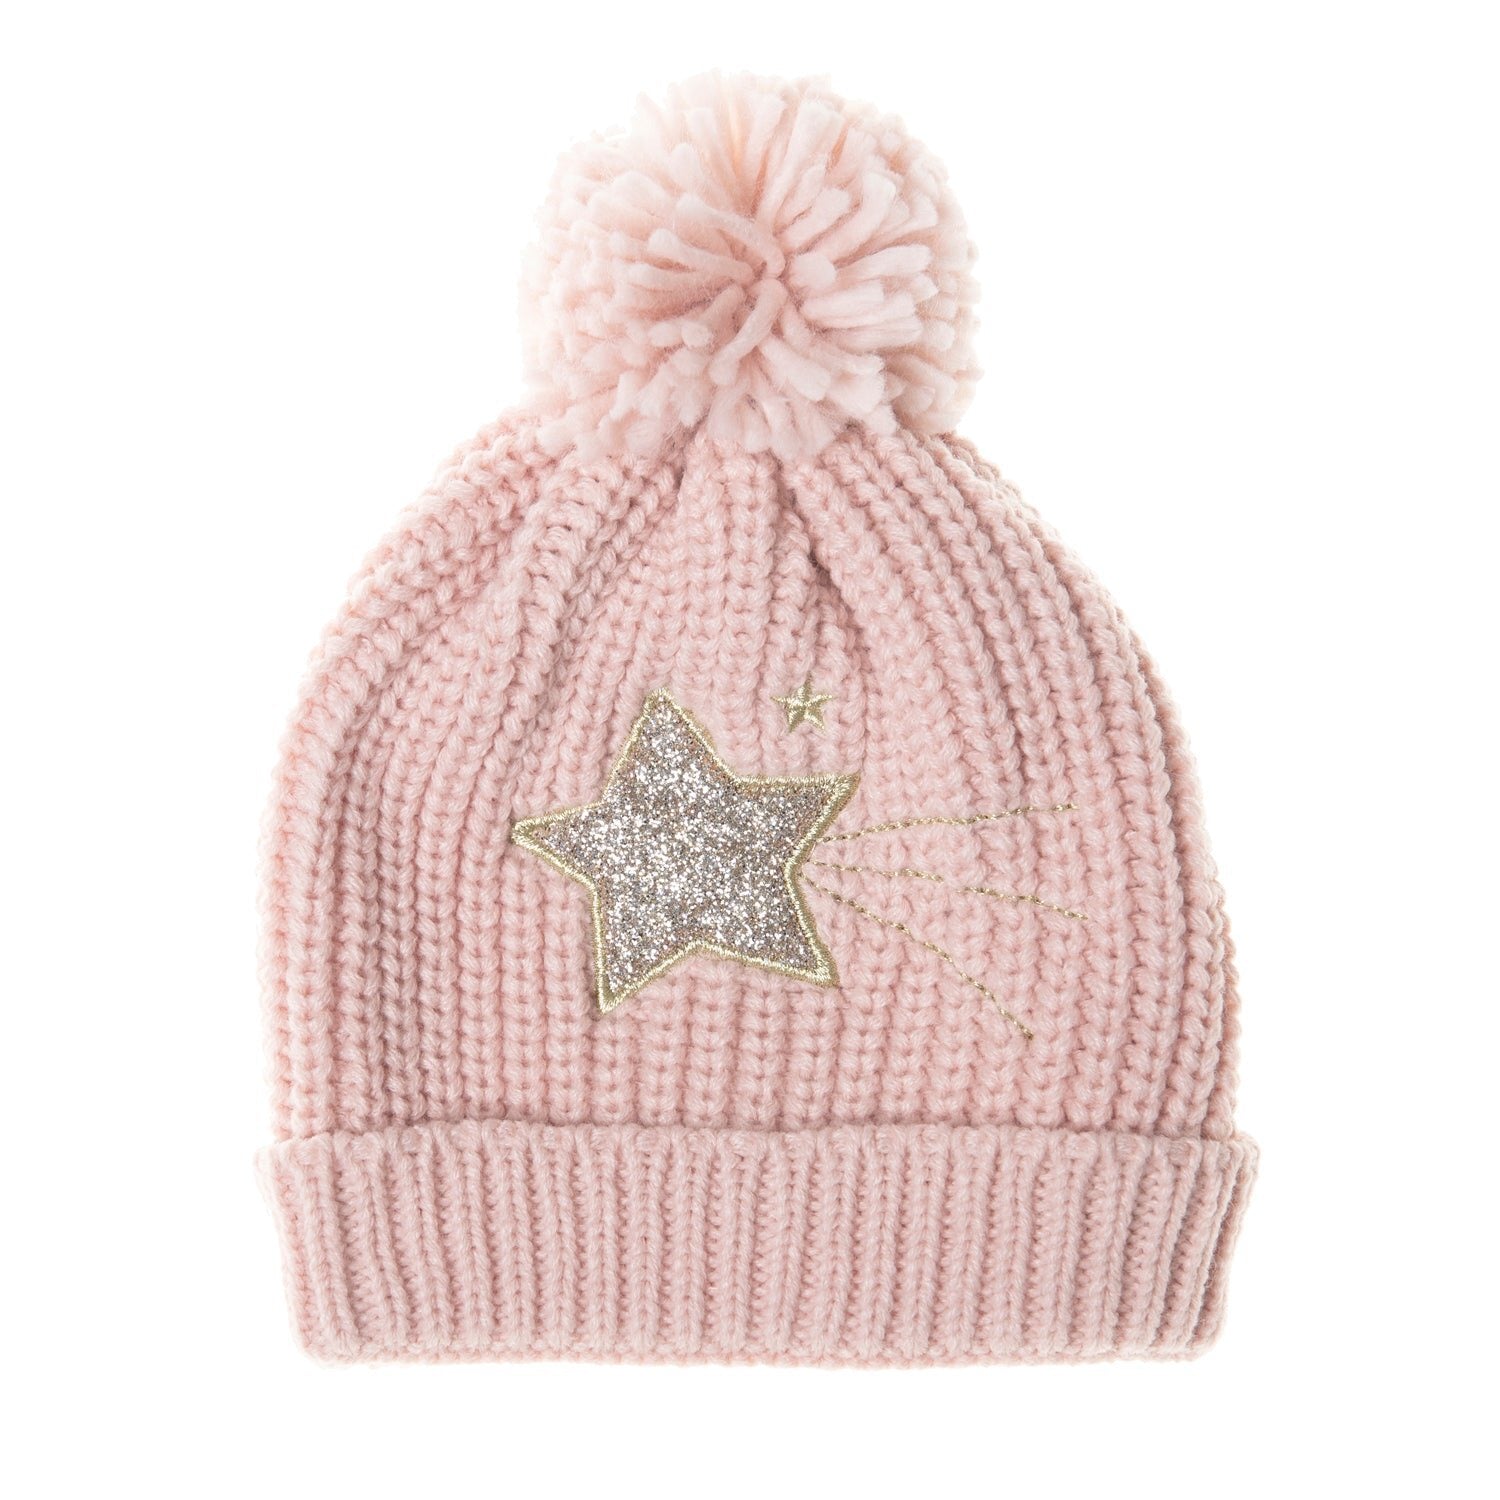 Rockahula Moonlight Knitted Hat Pink 3-6 Years